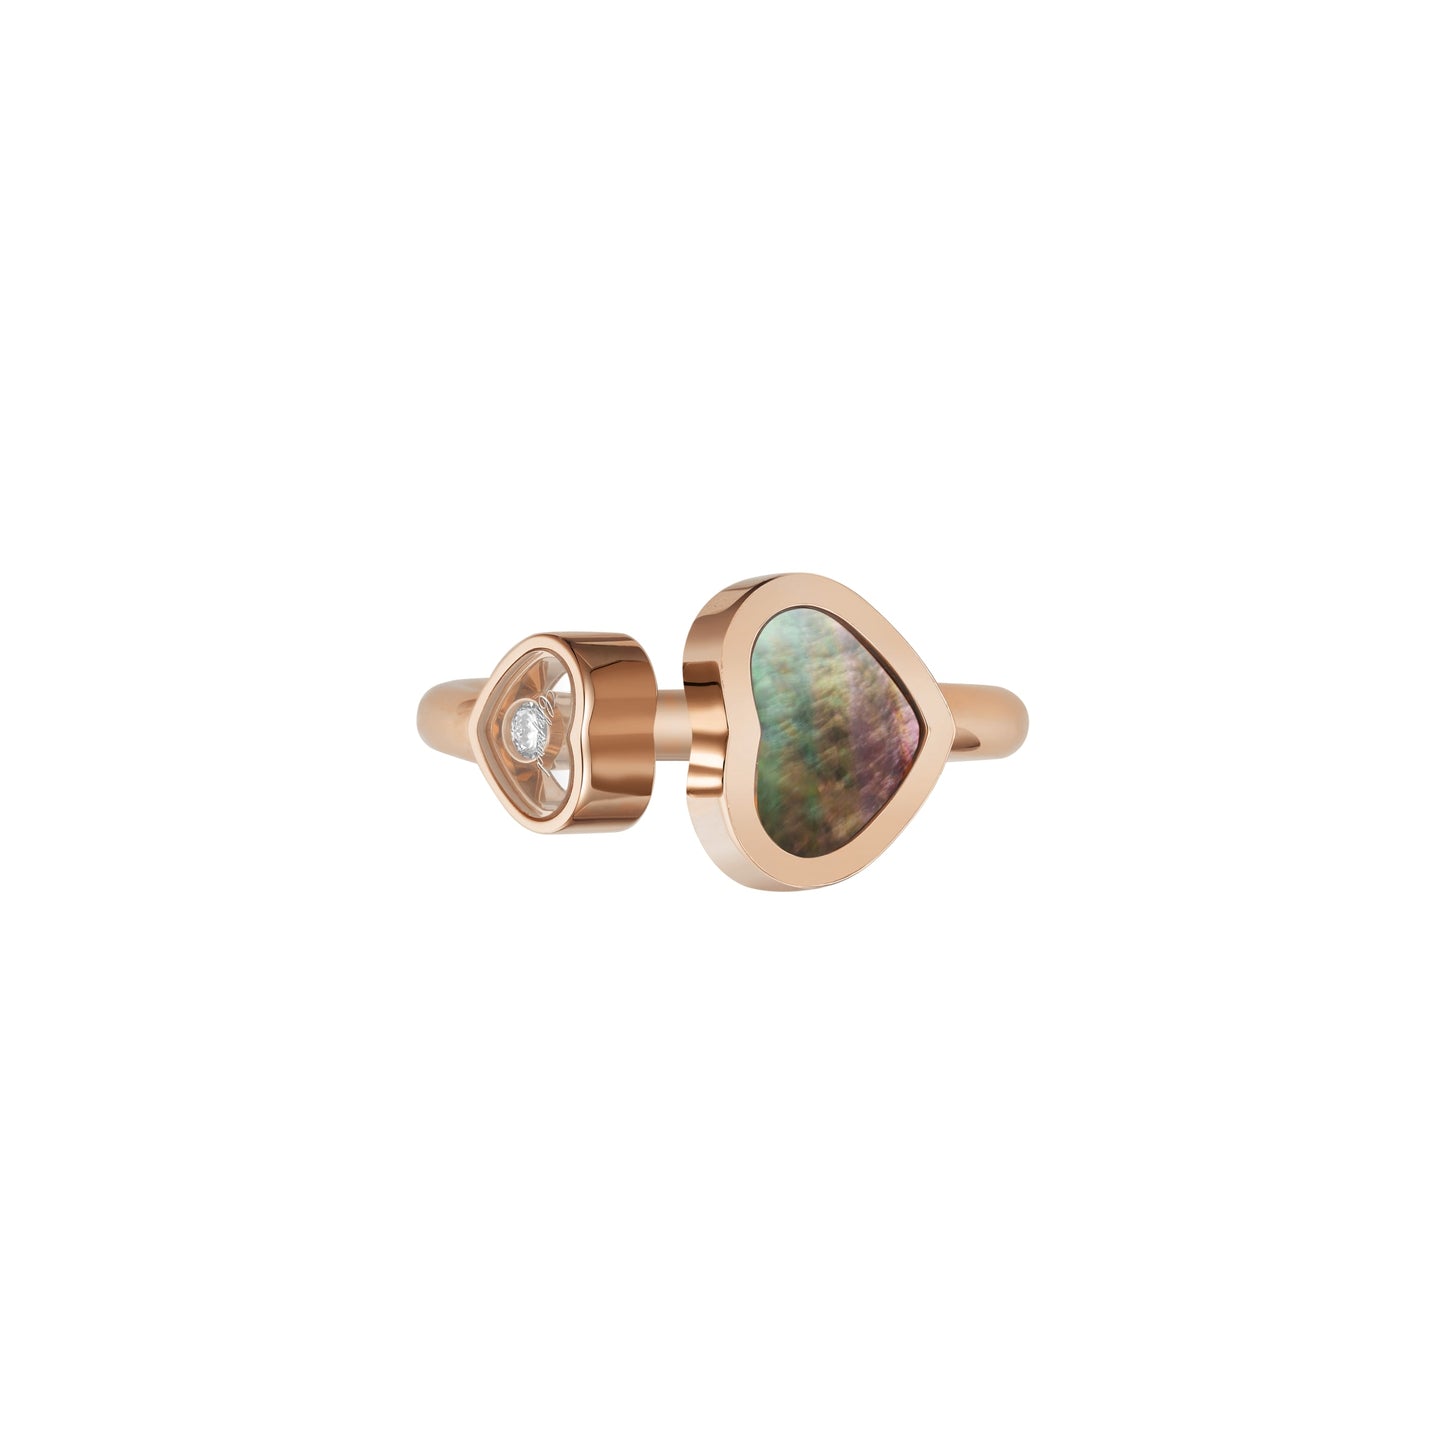 HAPPY HEARTS RING, ETHICAL ROSE GOLD, DIAMOND, BLACK TAHITIAN MOTHER-OF-PEARL 829482-5320